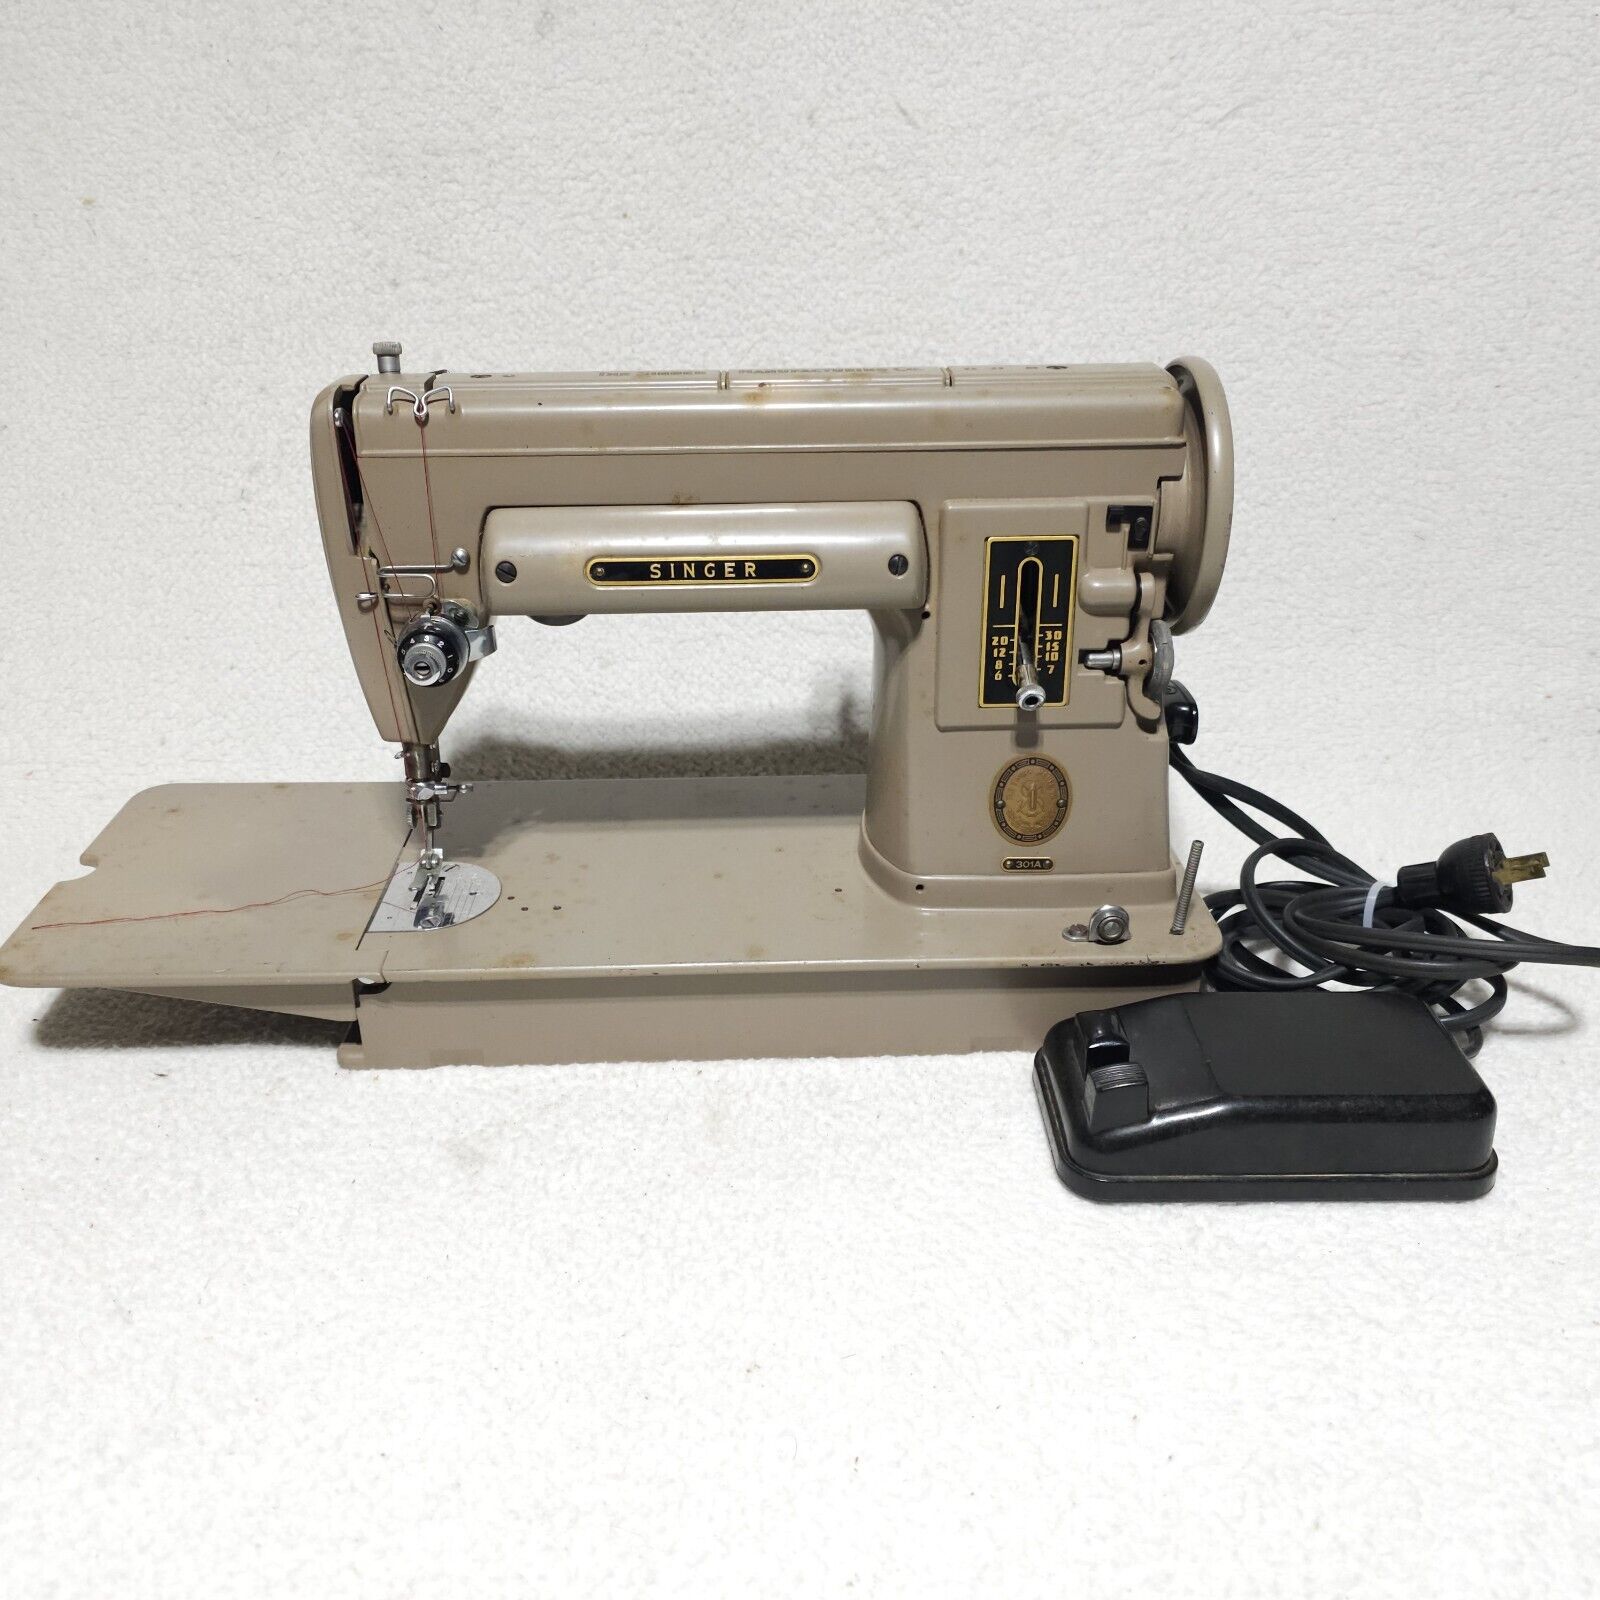 1954 Singer 301A Vintage Heavy Duty Sewing Machine. Tested